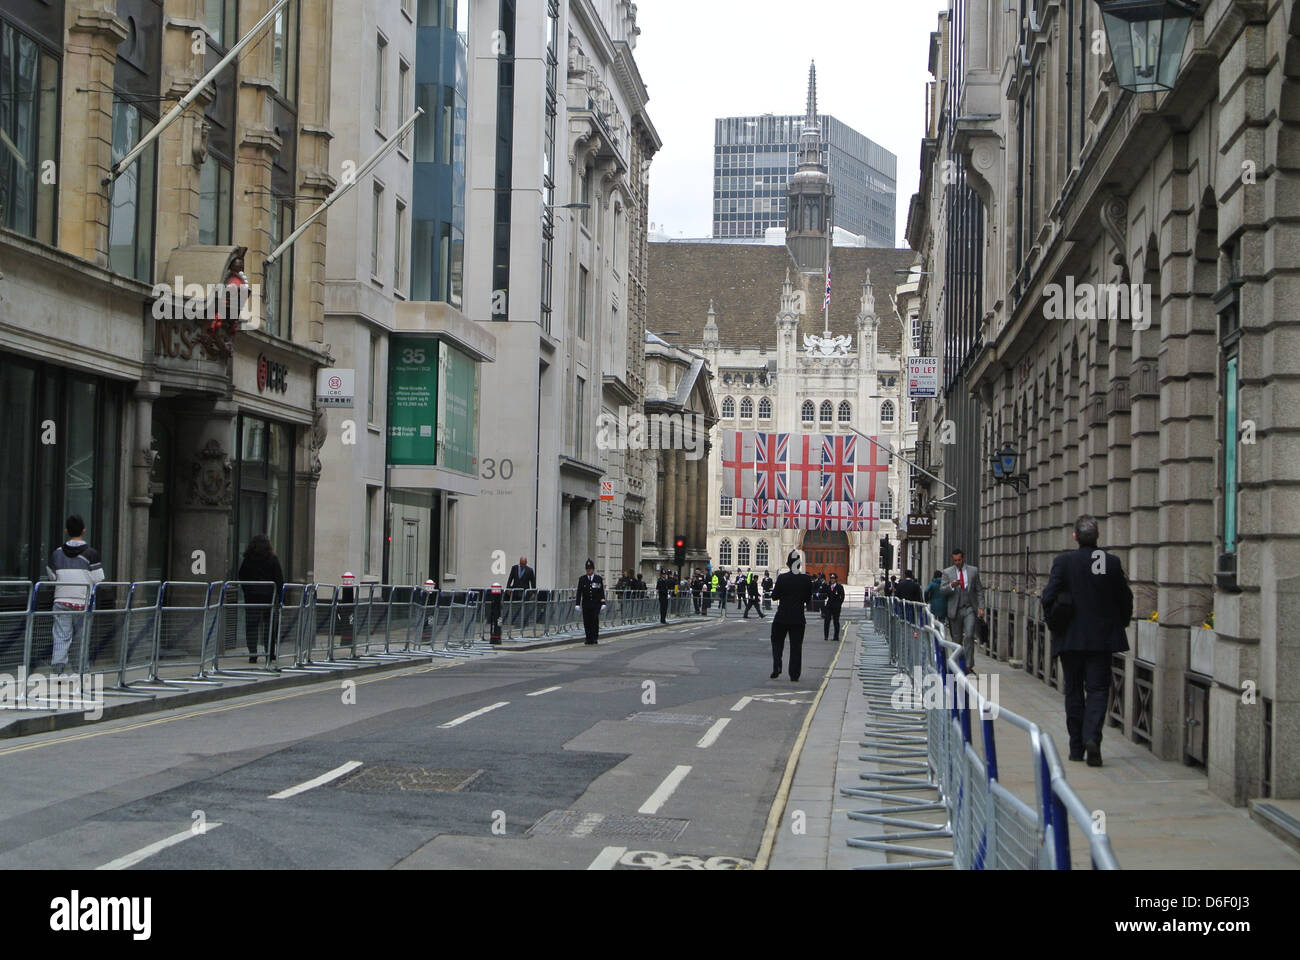 Empty roads, no traffic. Day of Margaret Thatchers funeral. London. English flags, British Flags, policeman. Barriers. Stock Photo